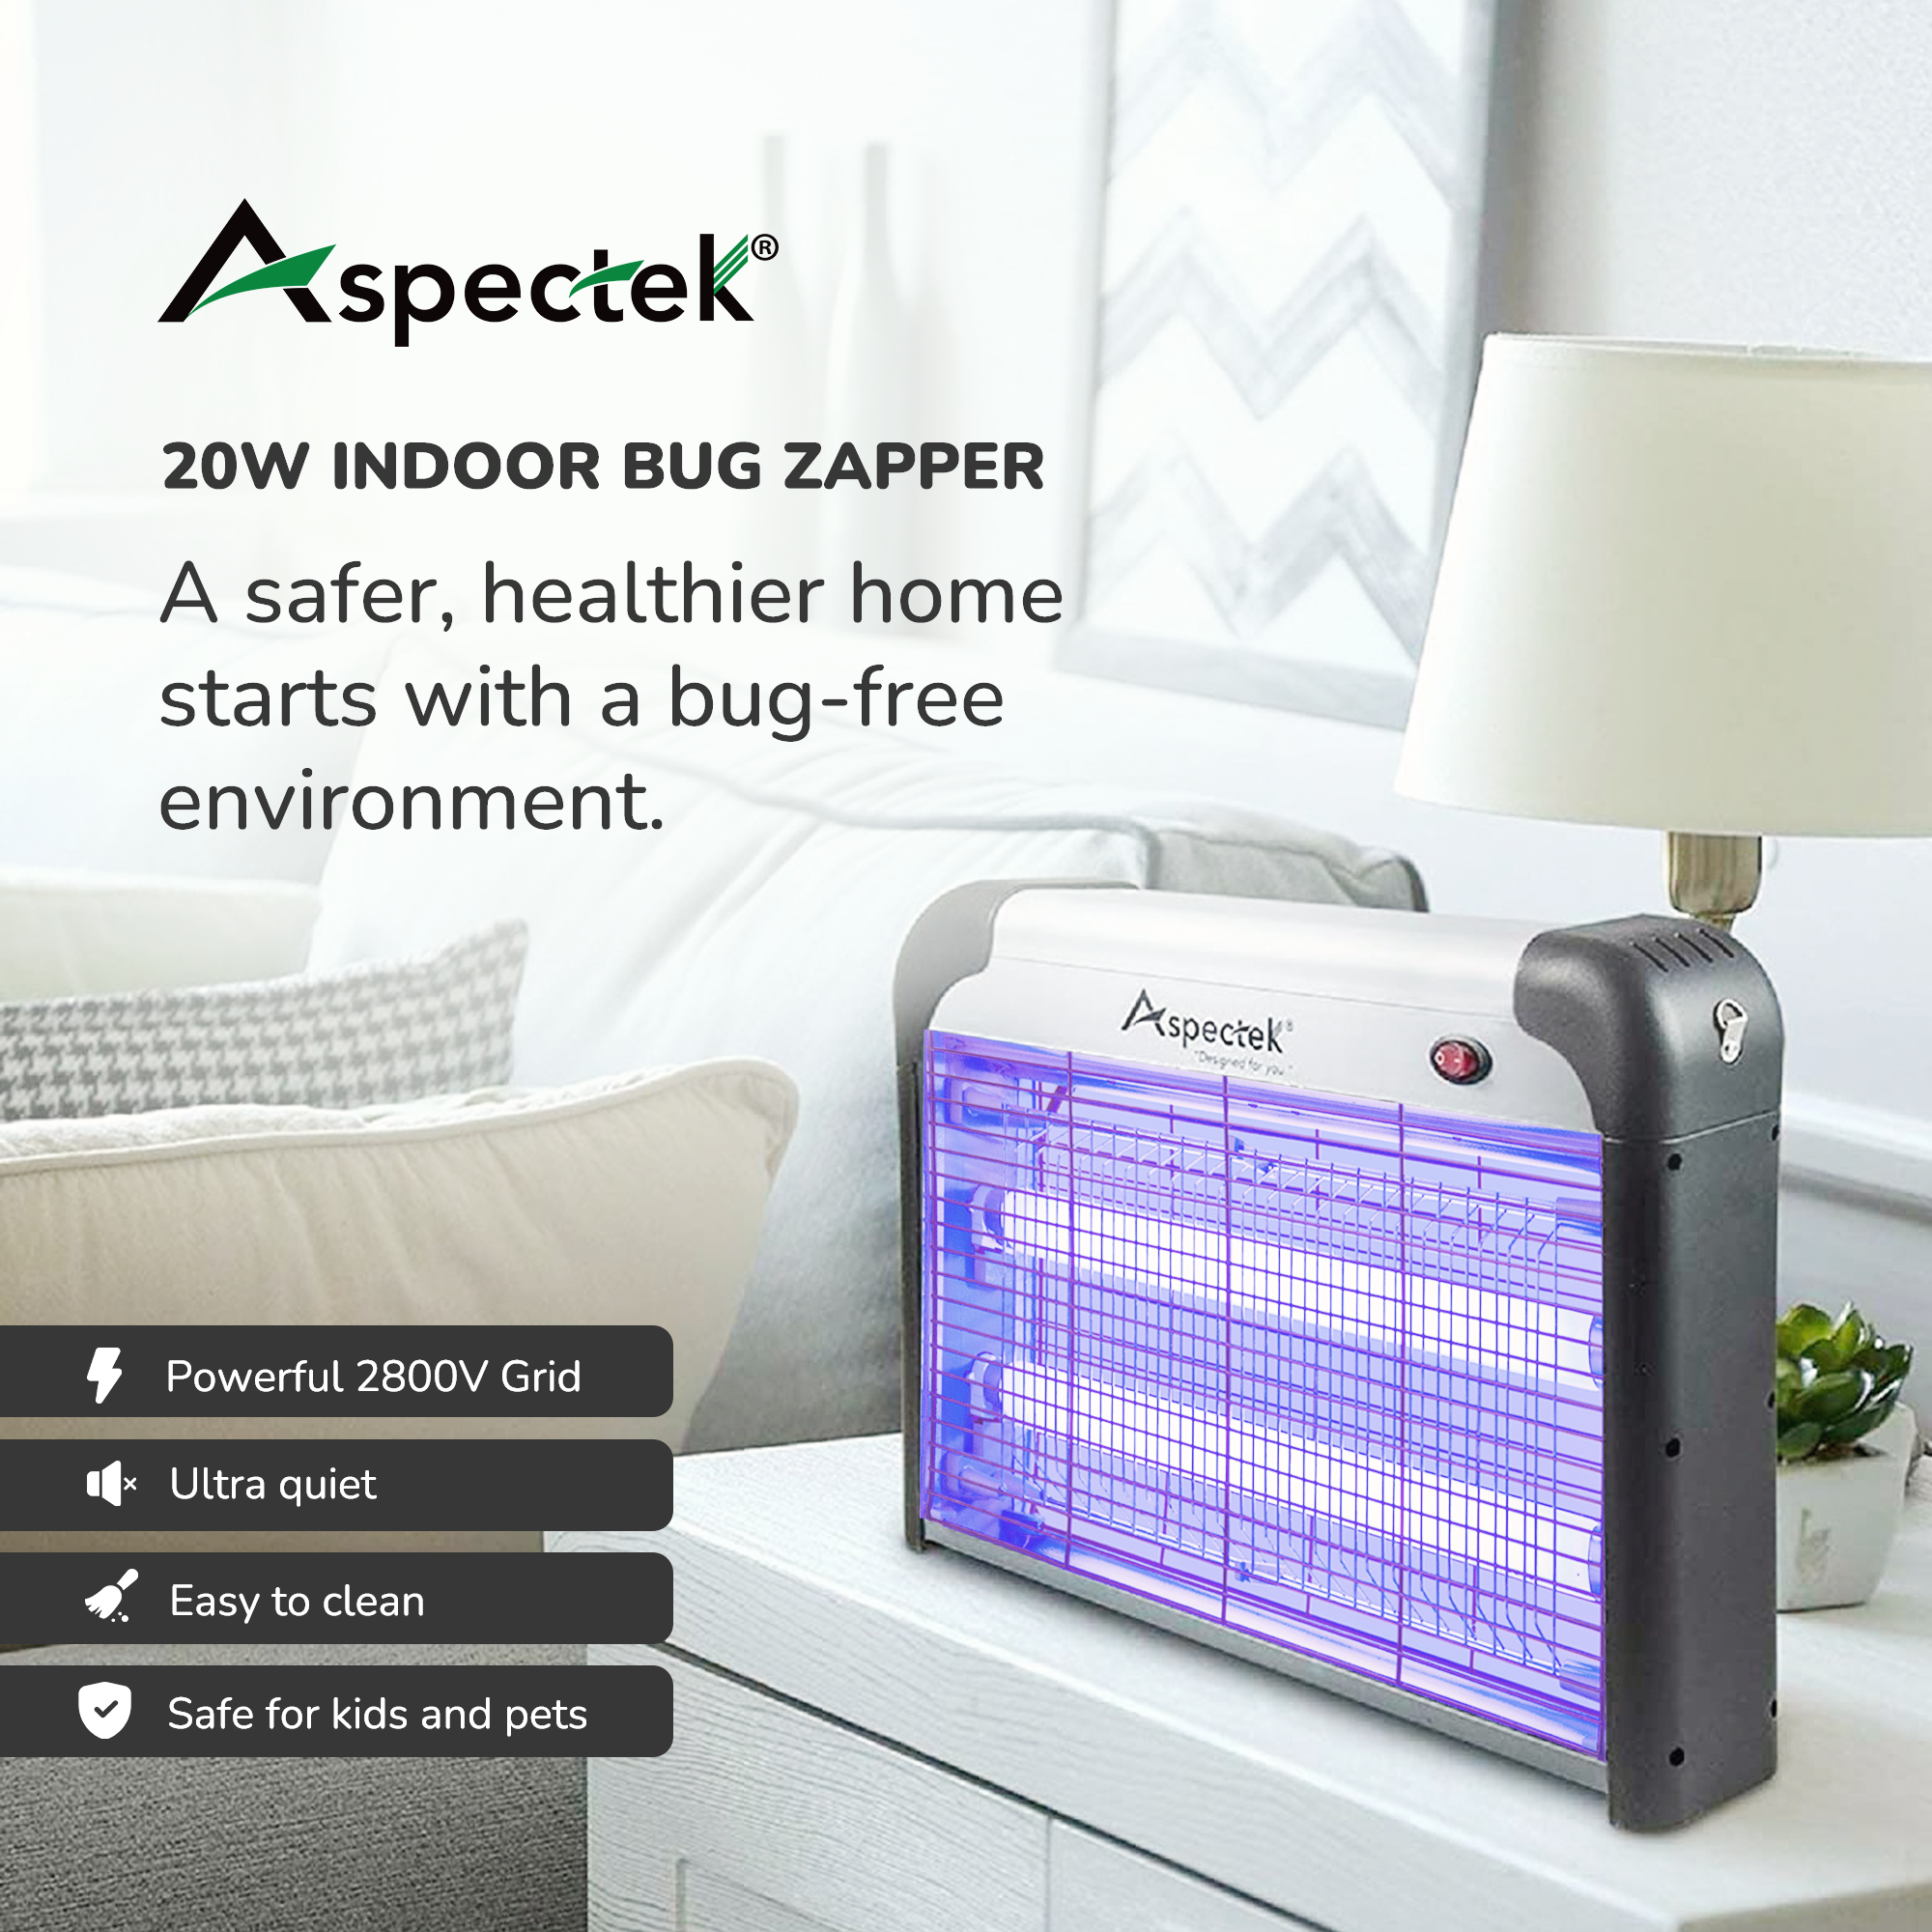 Aspectek 20W Indoor Bug Zapper, Powerful UV Bugs Lamp Attract Insects and 2800V Grid Kills Flying Insects SOLID BLACK